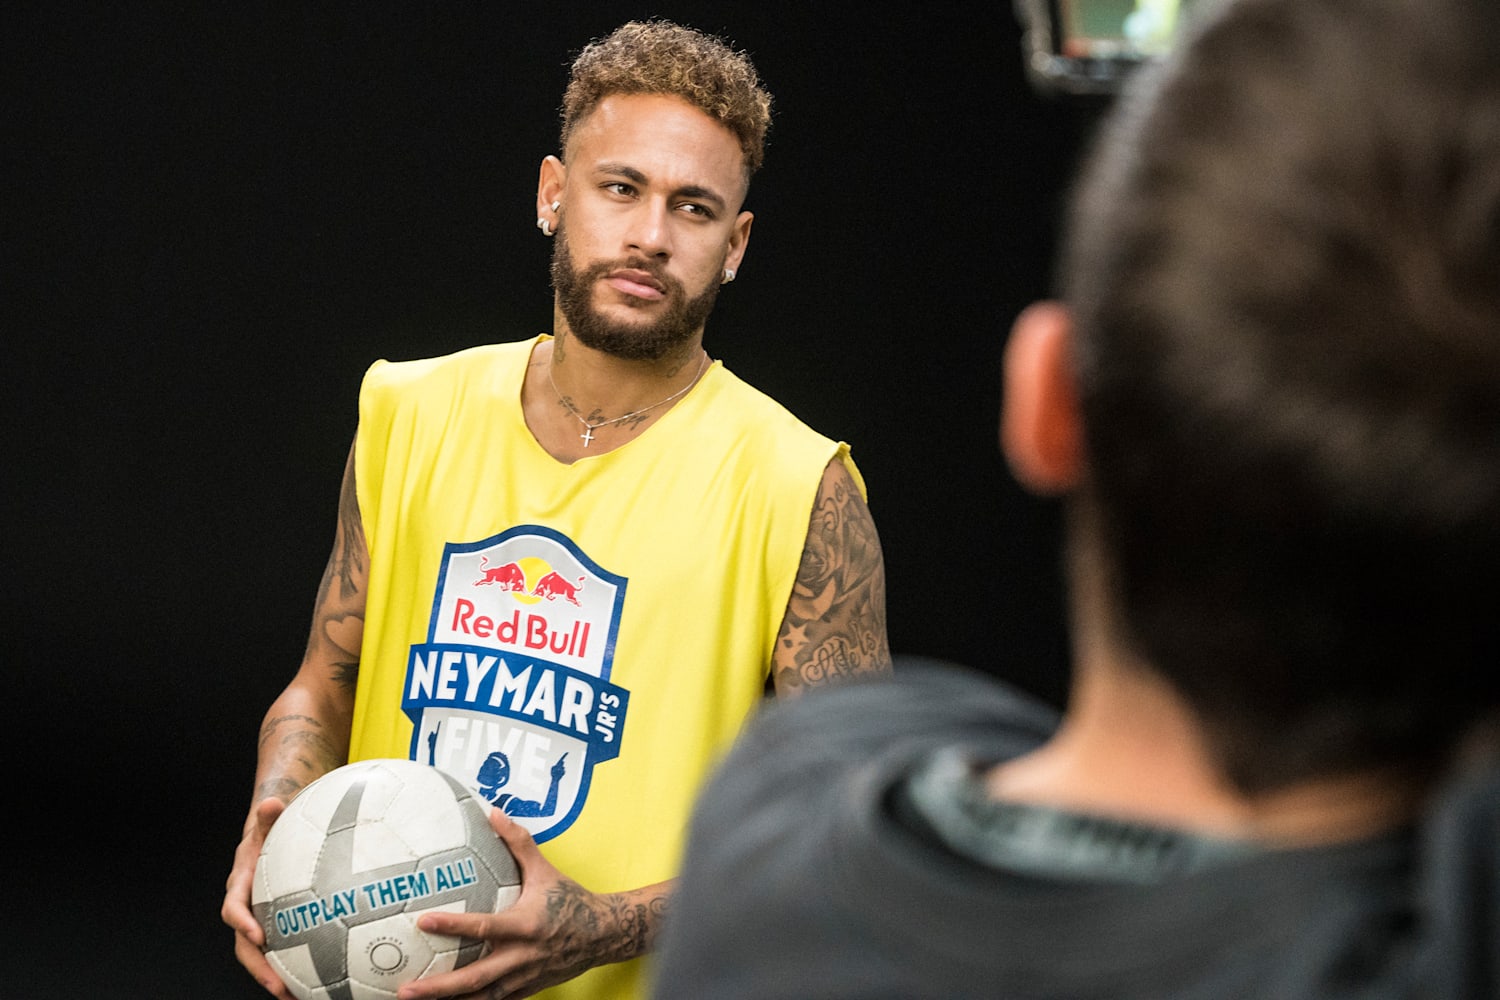 Neymar Jr And His Passion For Football